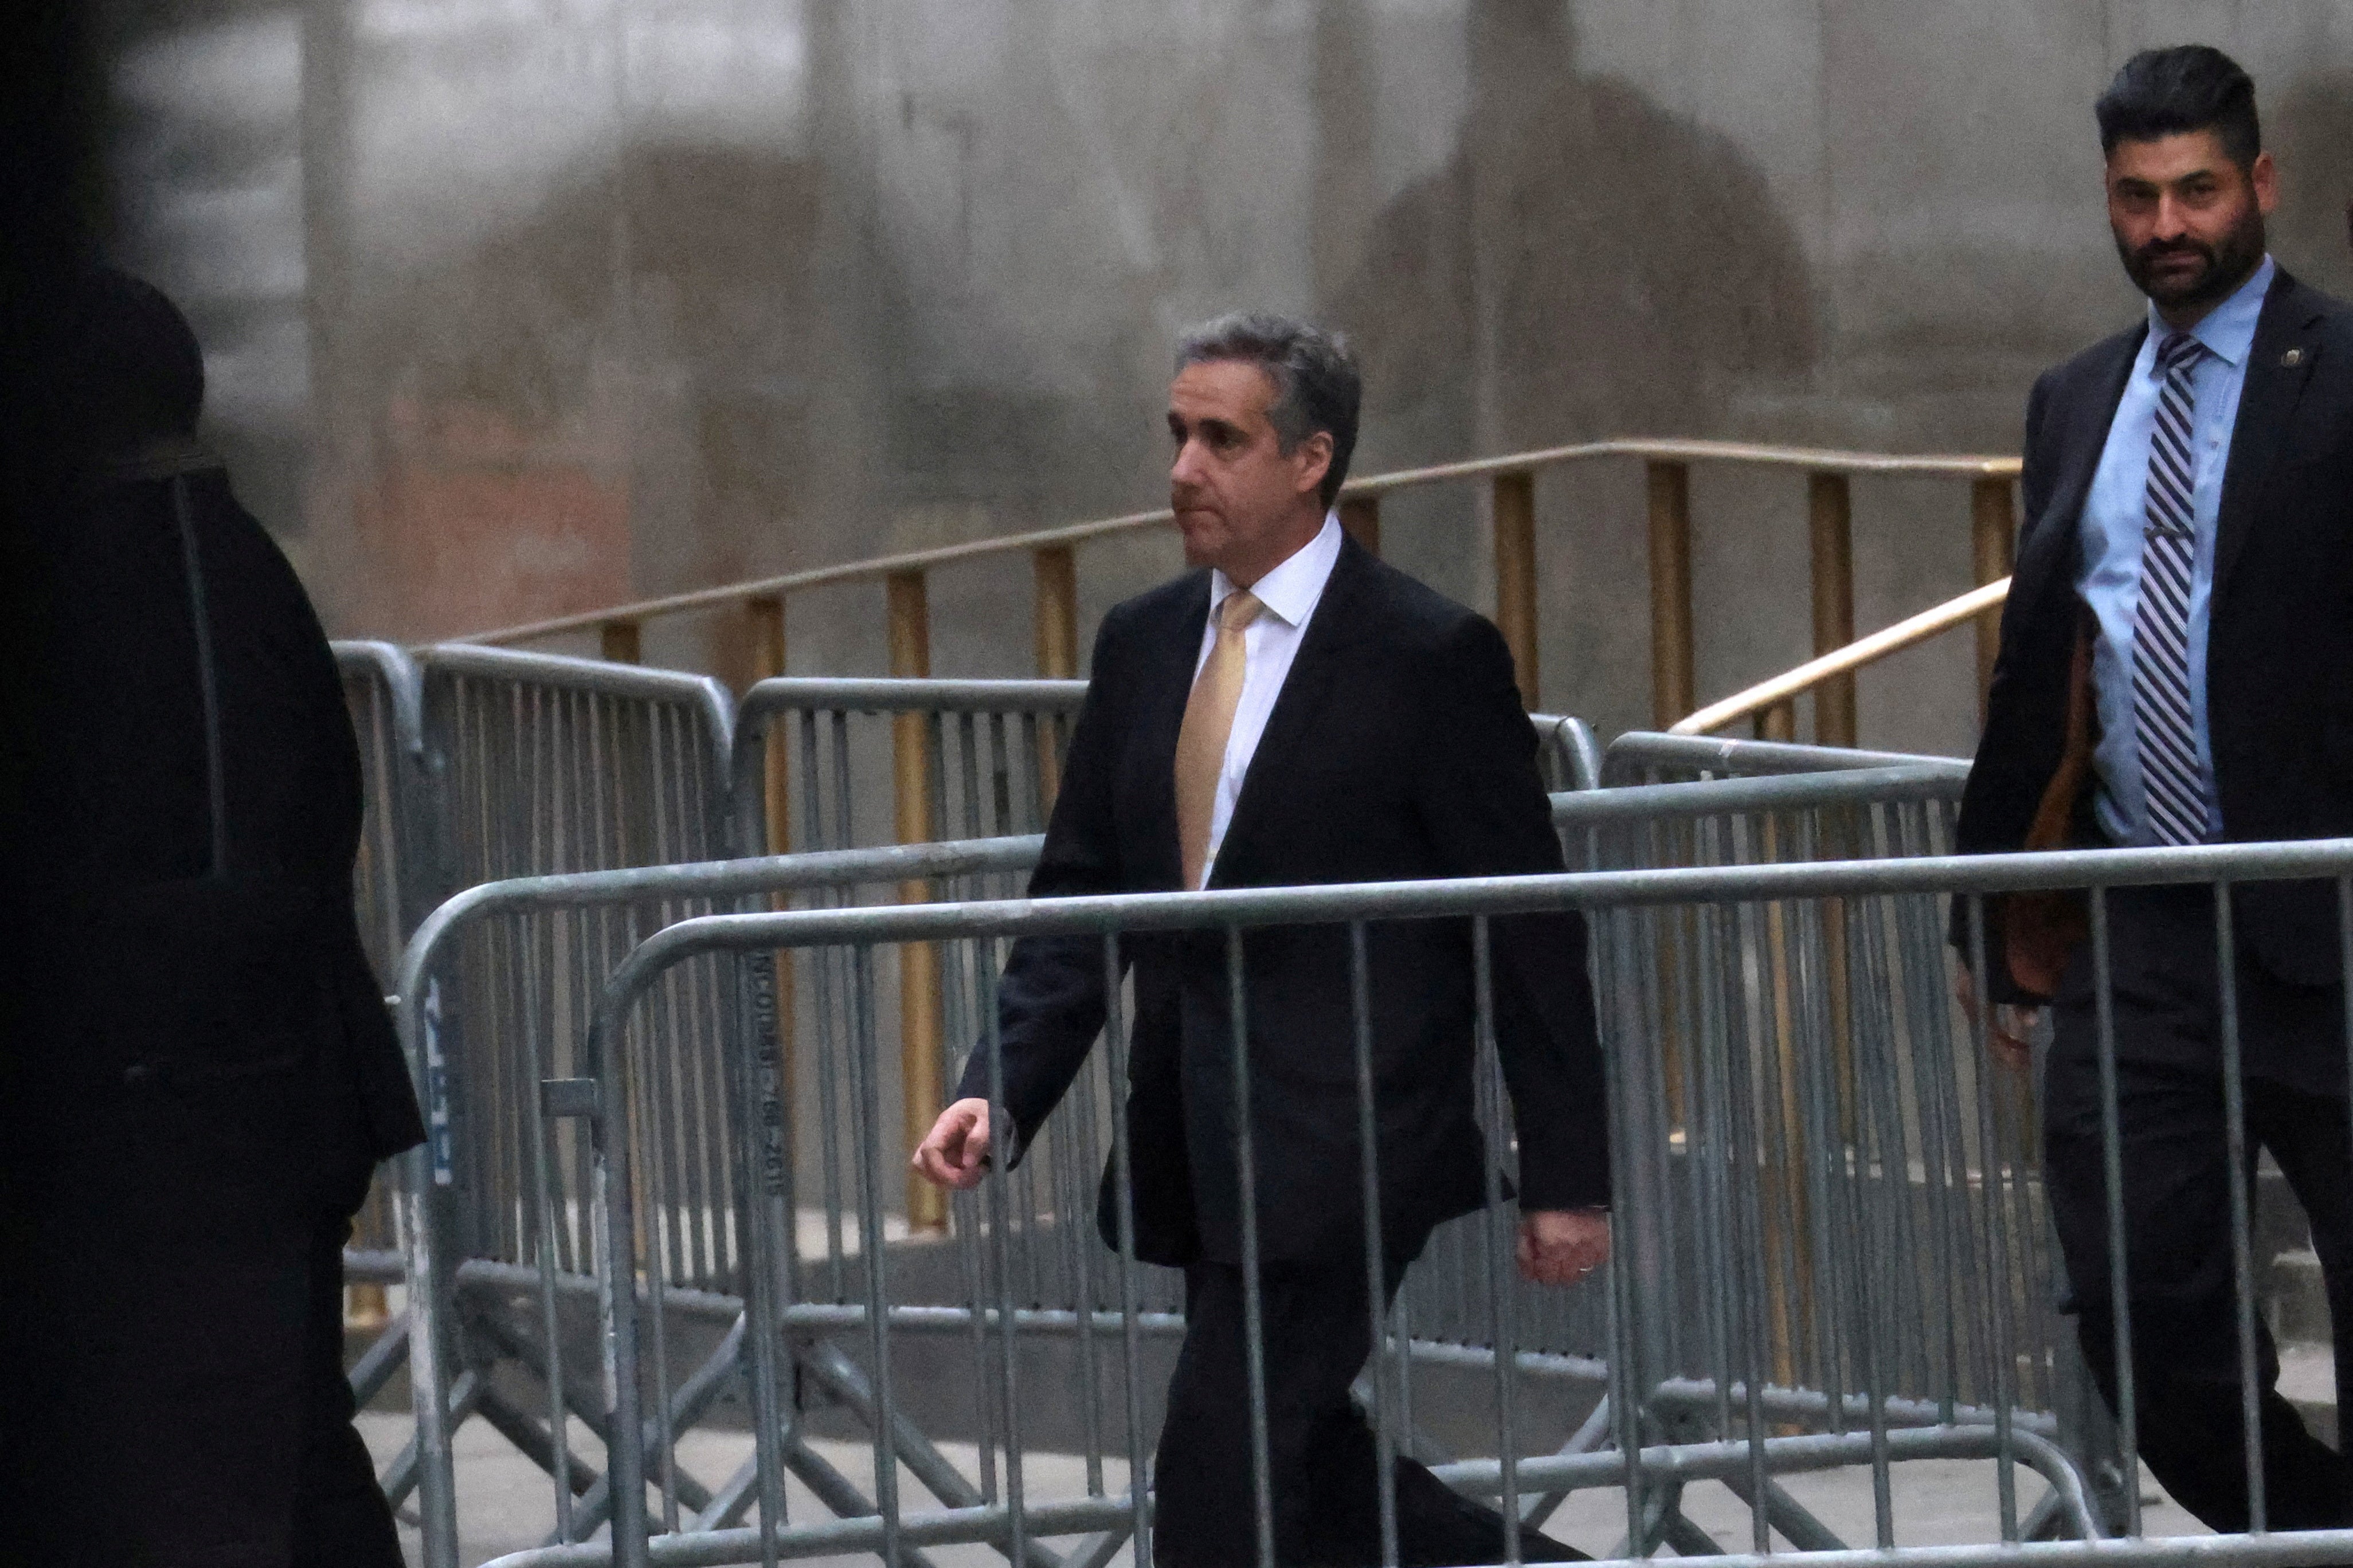 Michael Cohen leaves a criminal courthouse in Manhattan after testifying in Donald Trump’s hush money trial on May 17.